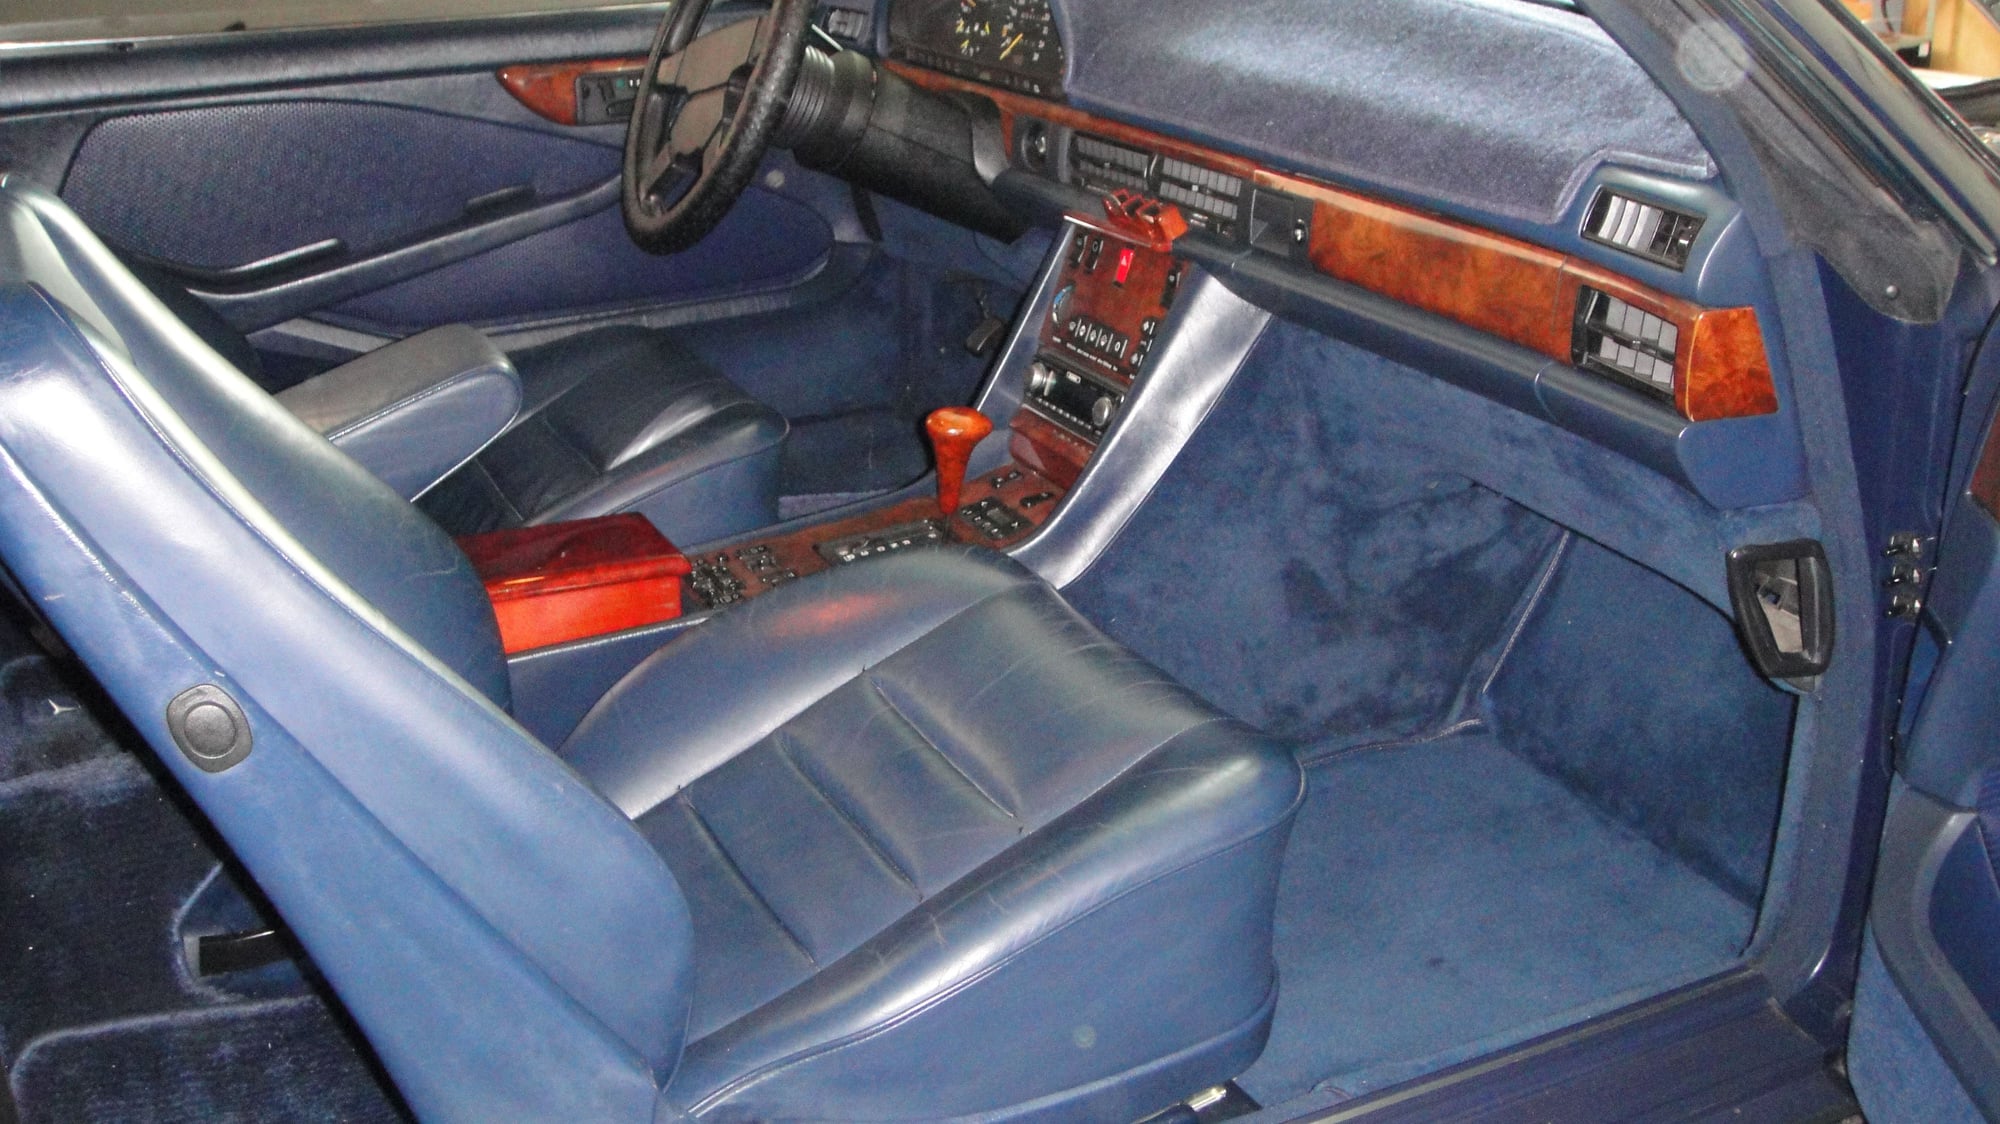 1987 Mercedes-Benz 560SEC - 87   560  AMG - Used - VIN wdb1260451a275194 - 40 Miles - 8 cyl - 2WD - Automatic - Coupe - Blue - Indiana, IN 47906, United States